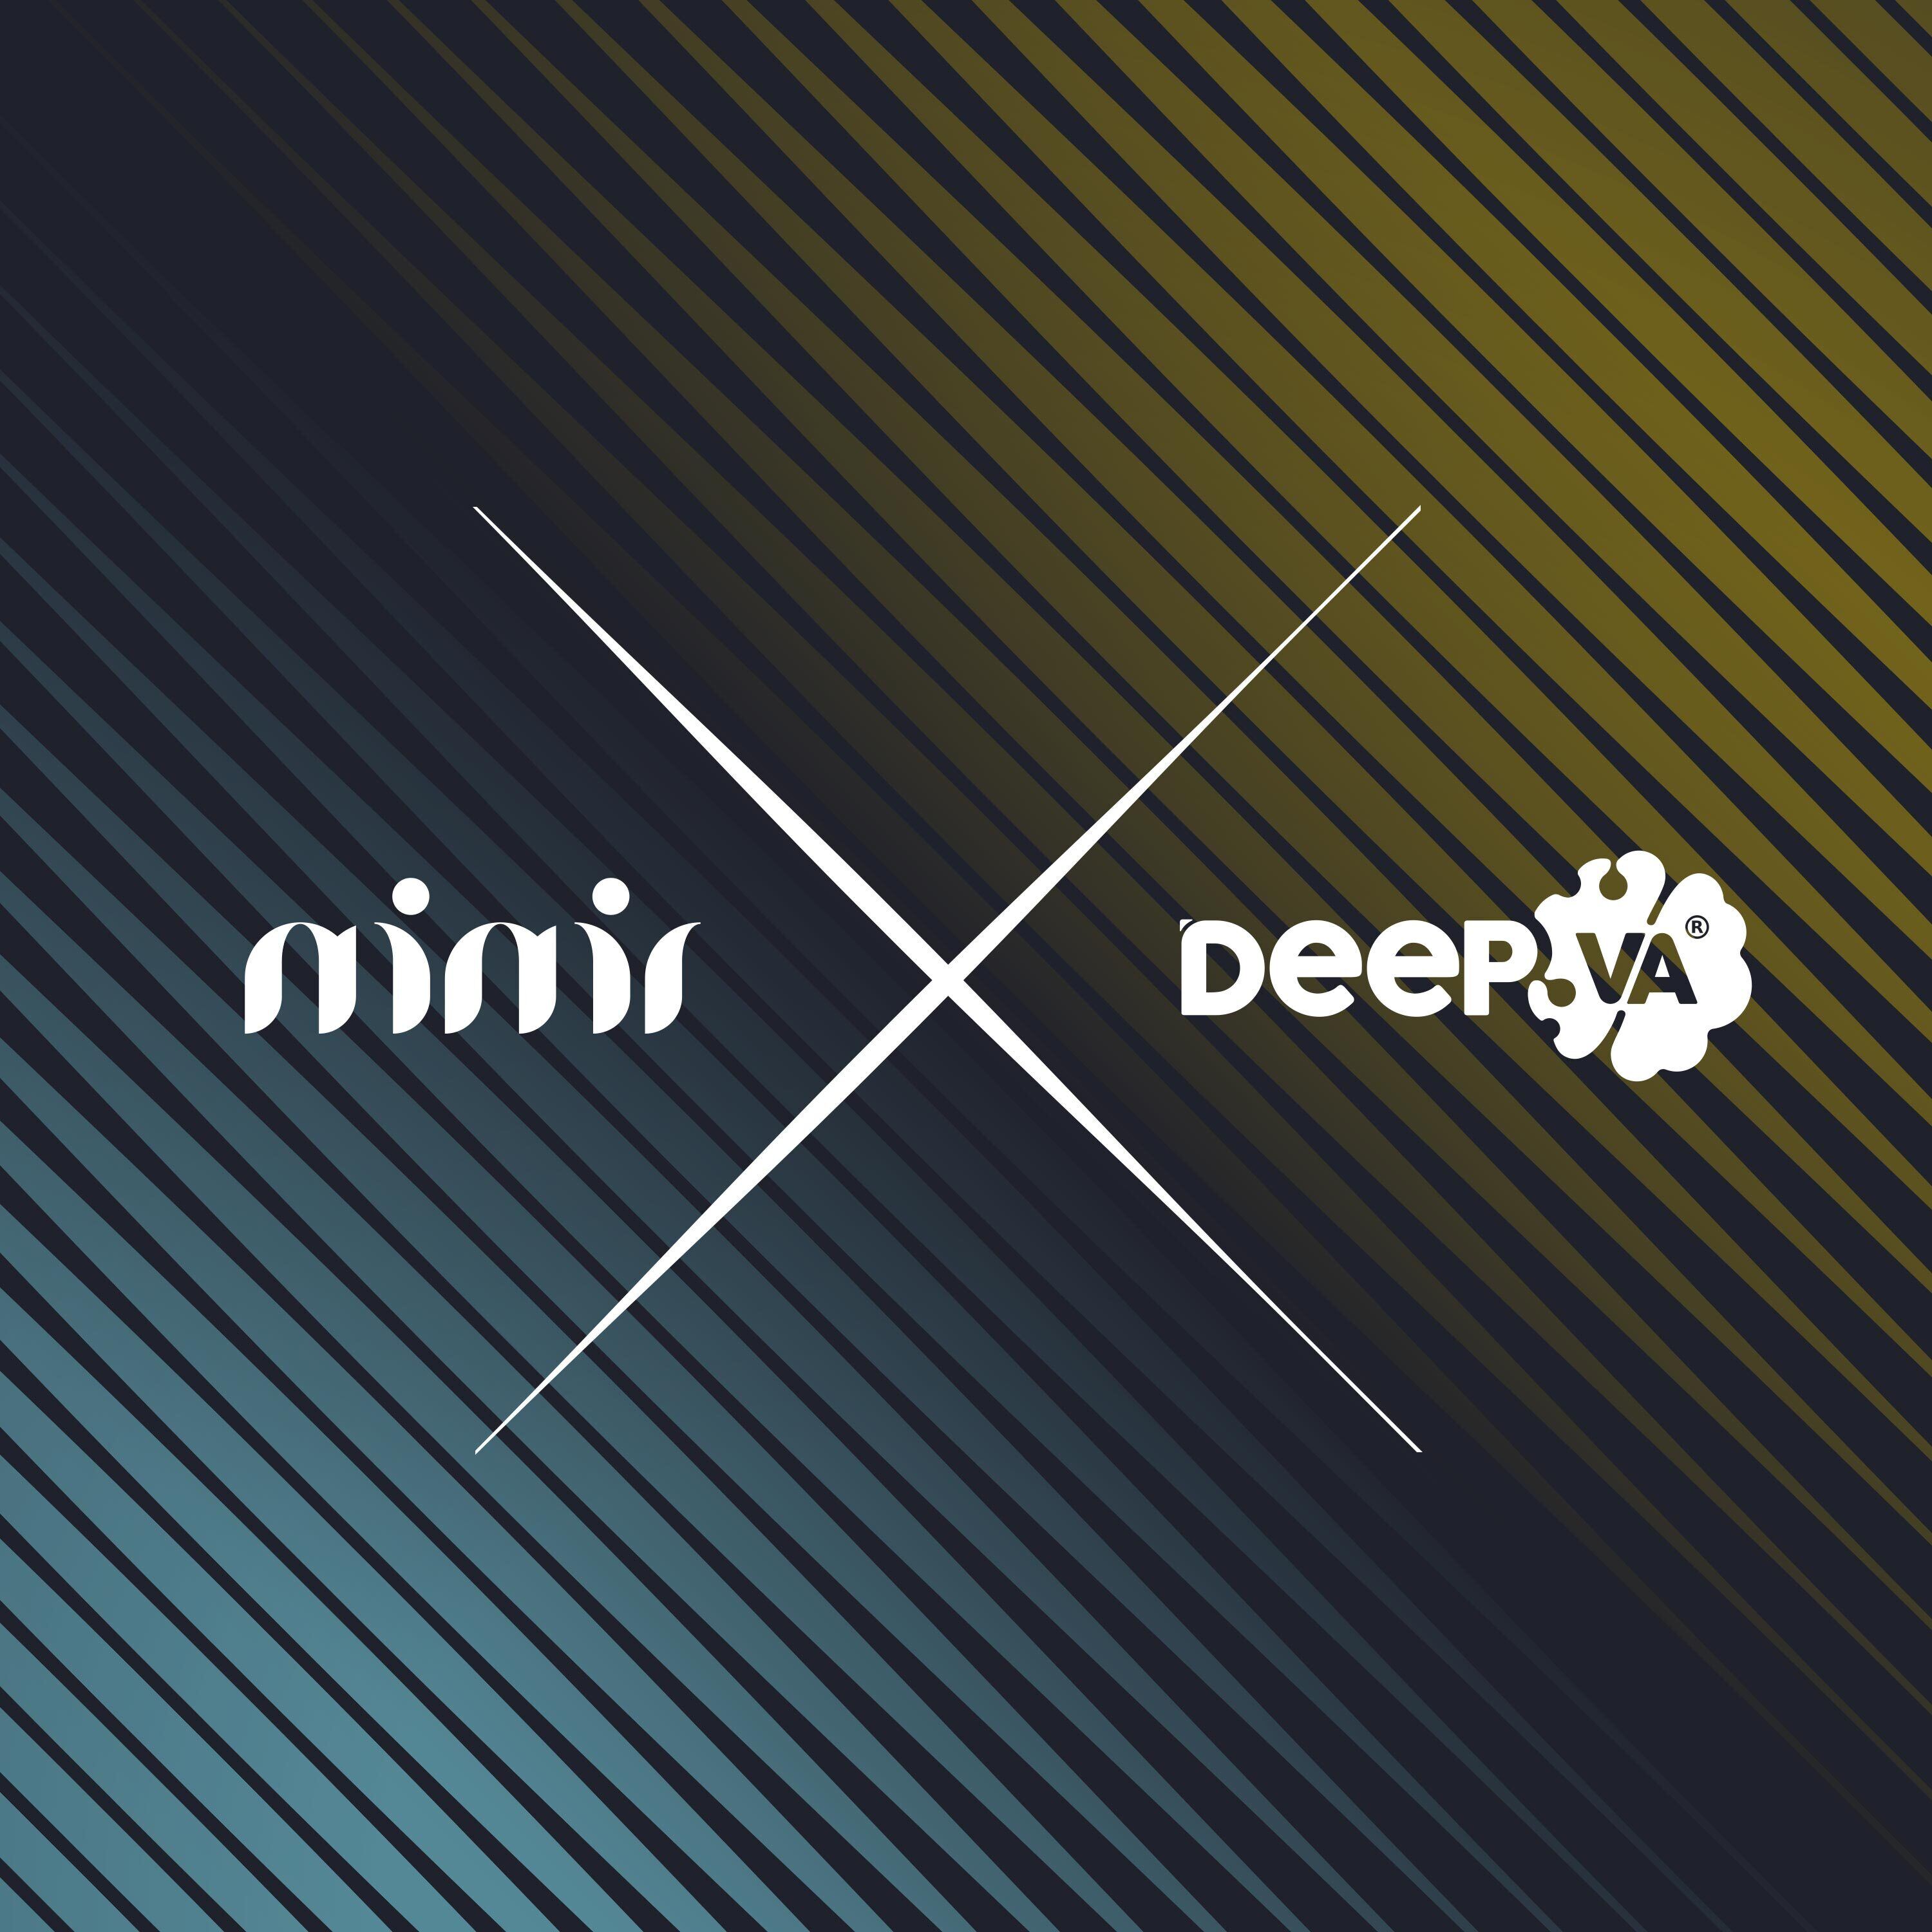 The Mimir and DeepVA logos together